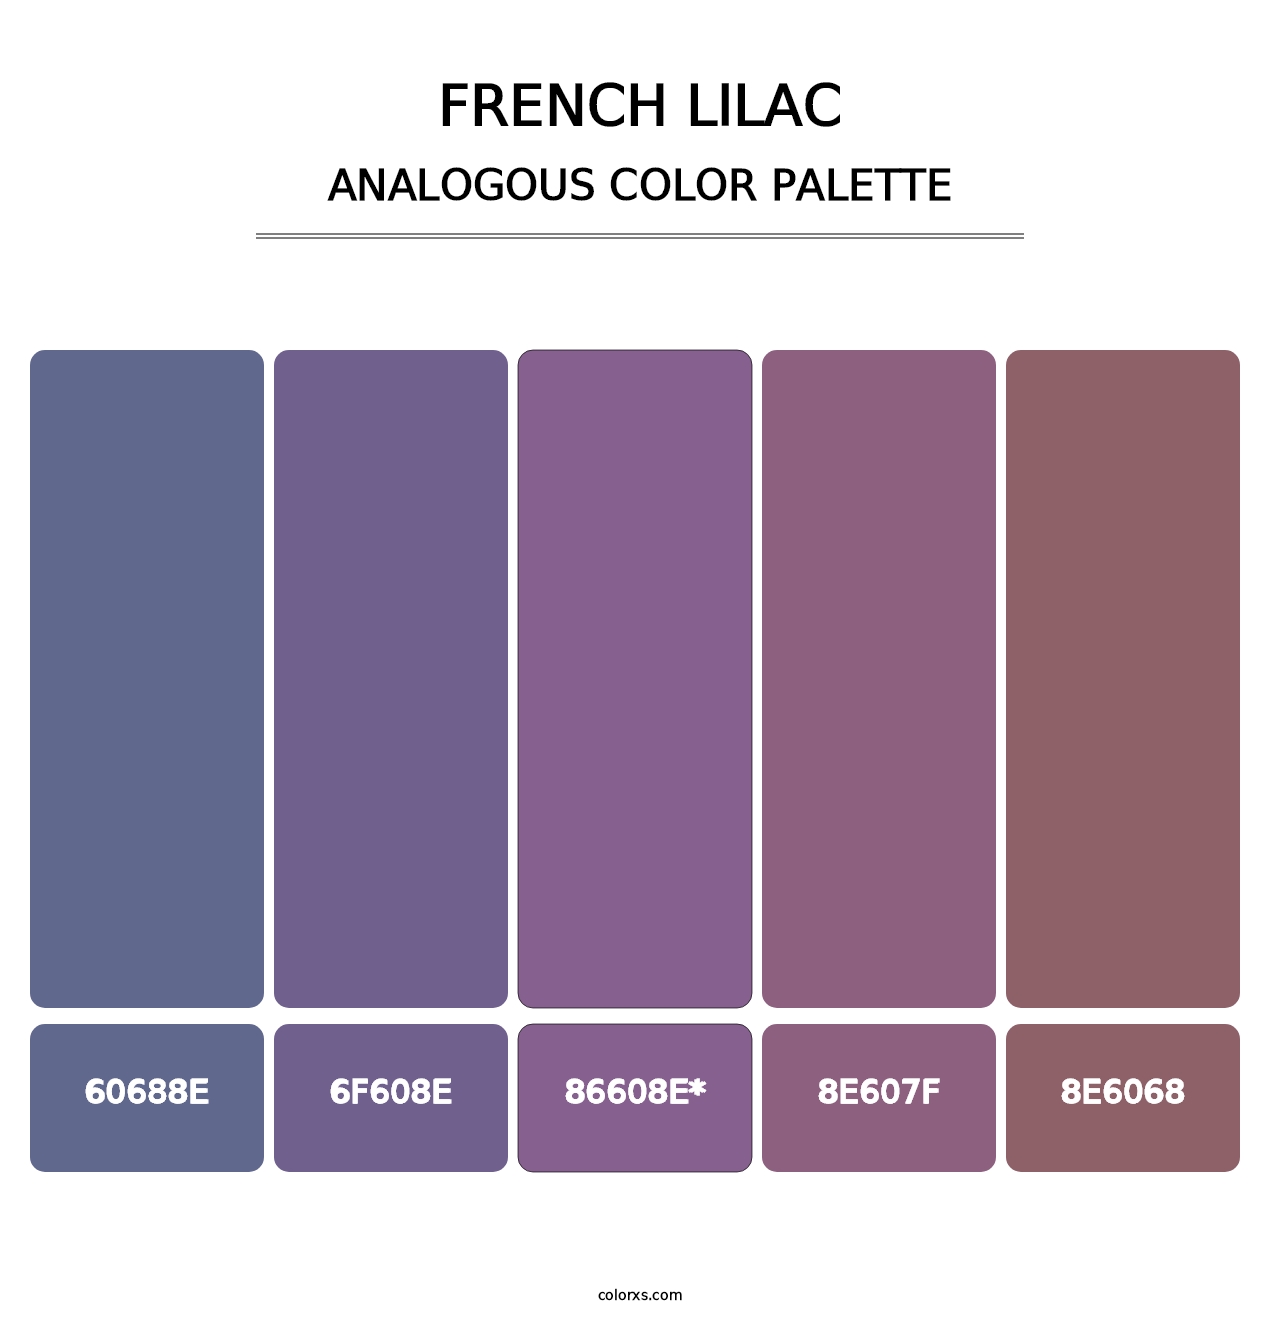 French Lilac - Analogous Color Palette